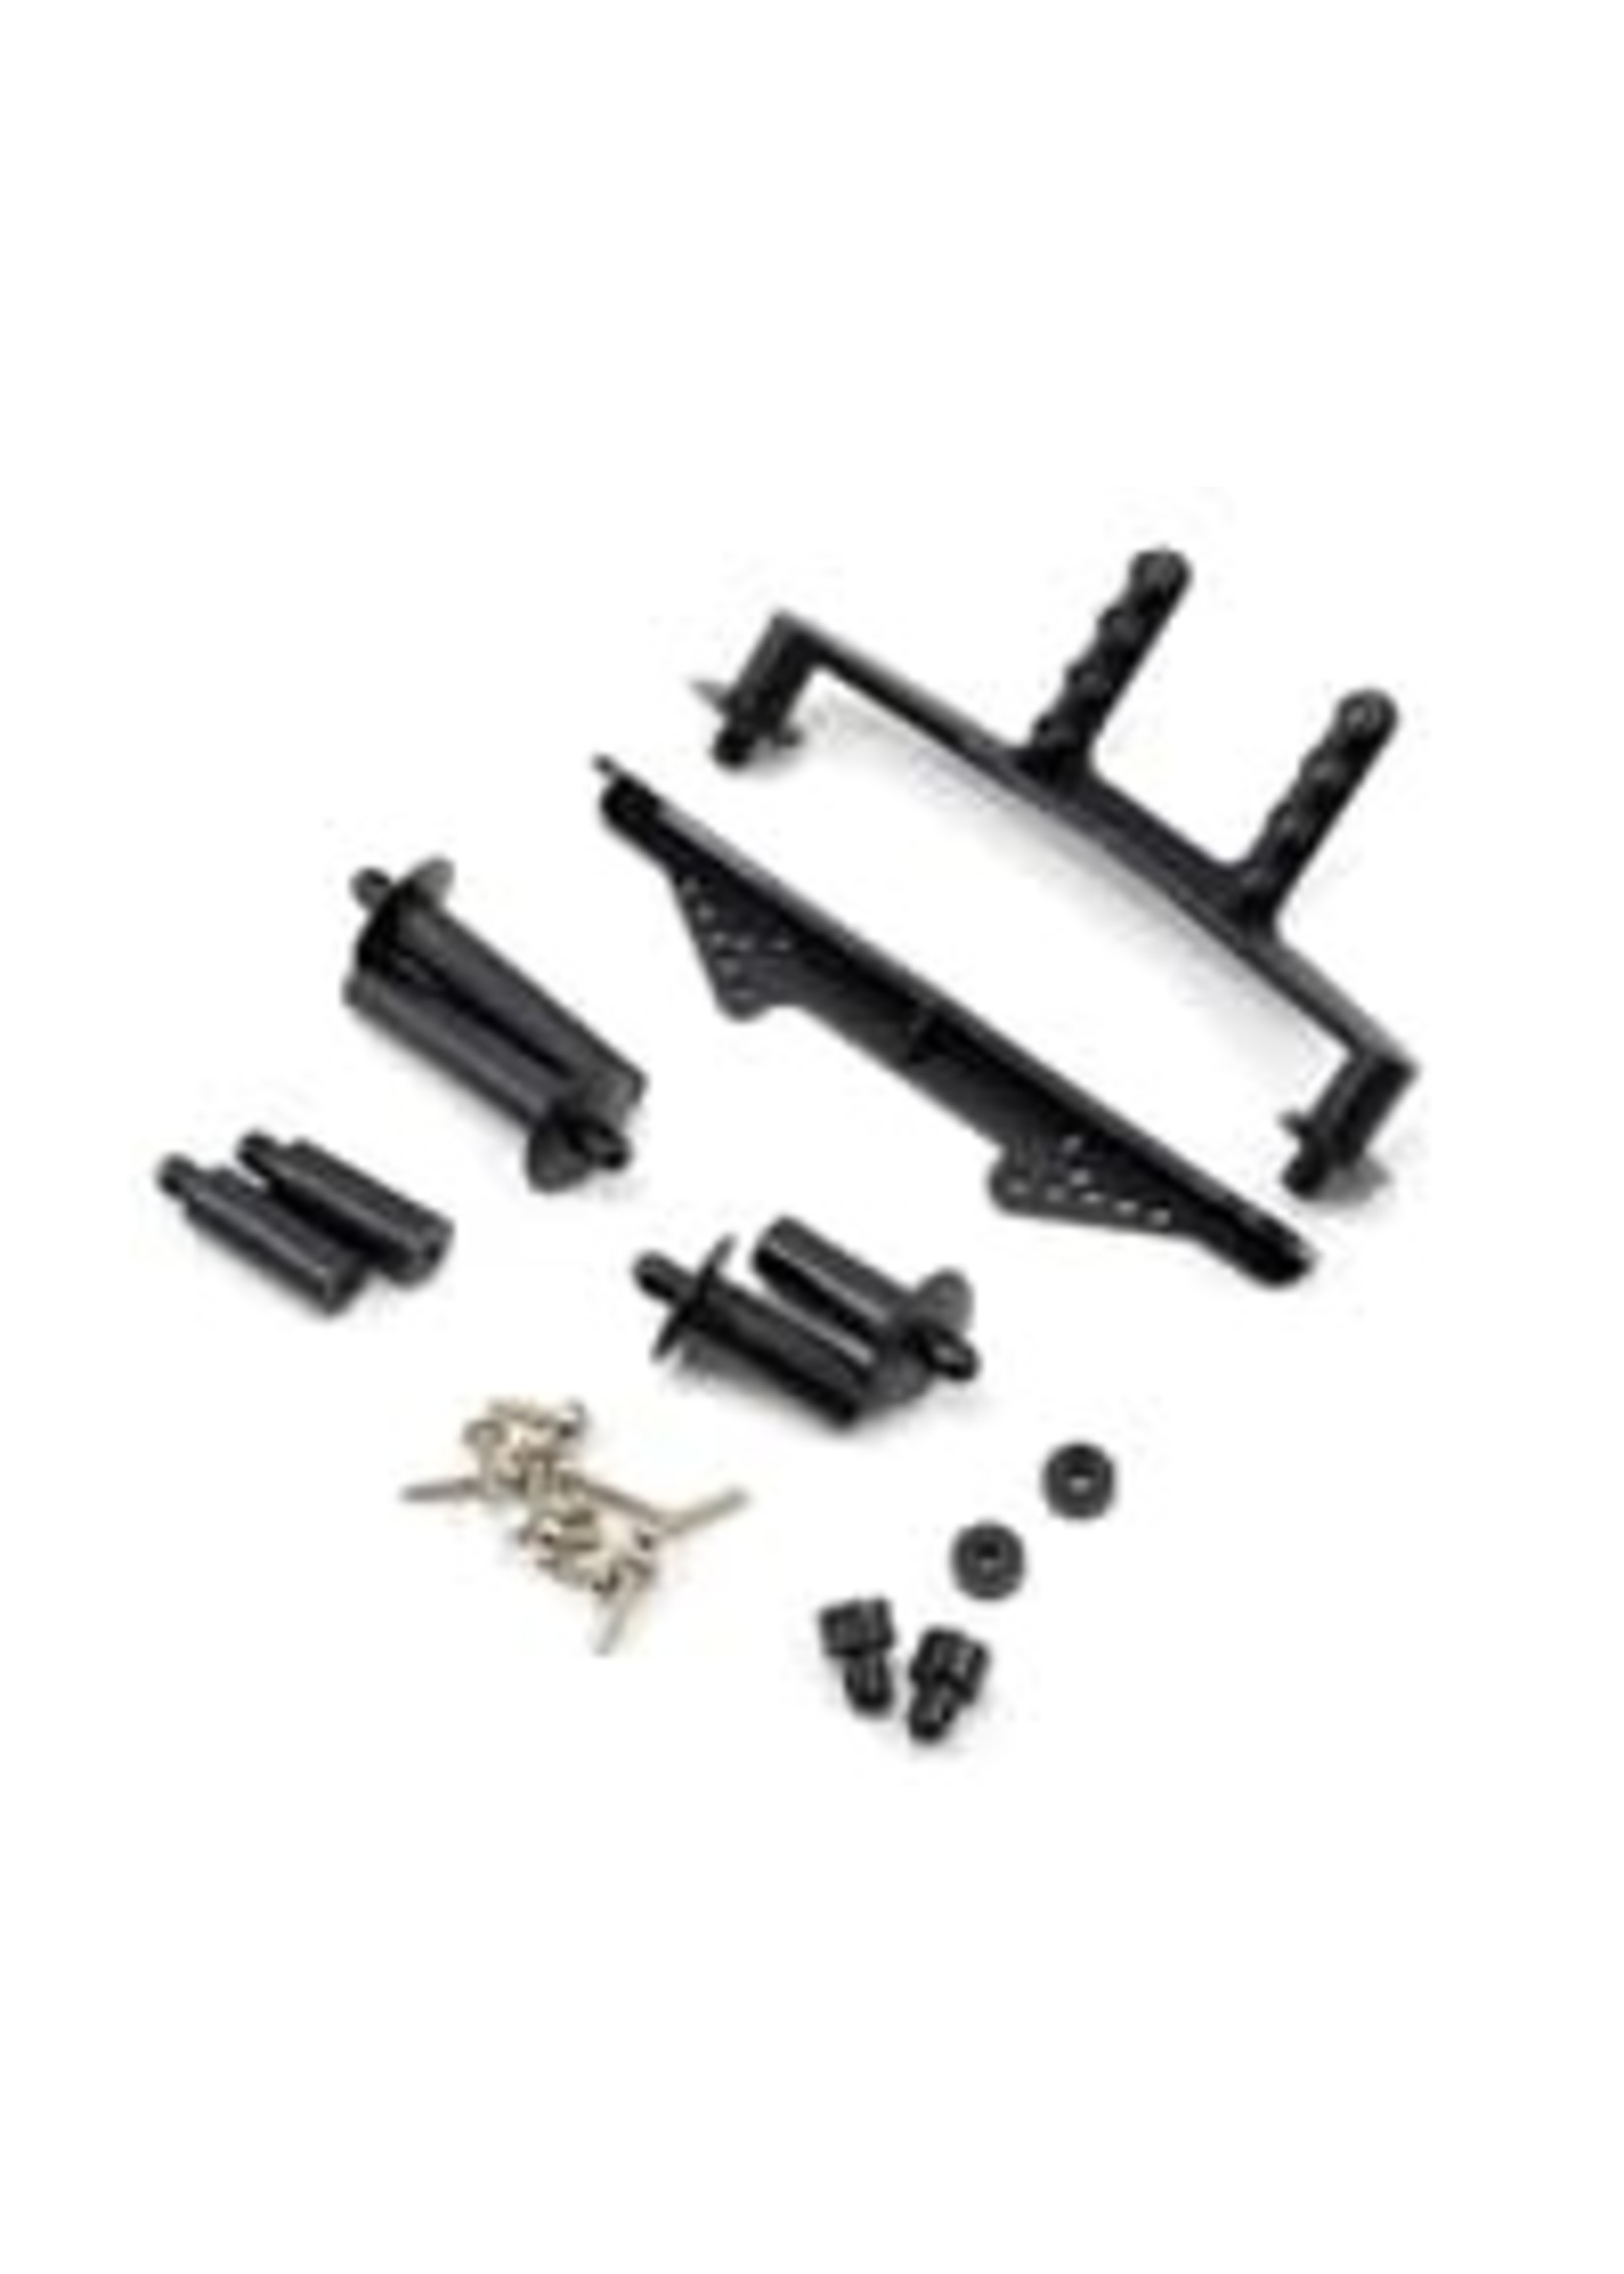 Traxxas 1914R Body mount, front & rear (black)/ body posts, 52mm (2), 38mm (2), 25mm (2), 6.5mm (2)/ body post extensions (4)/ hardware